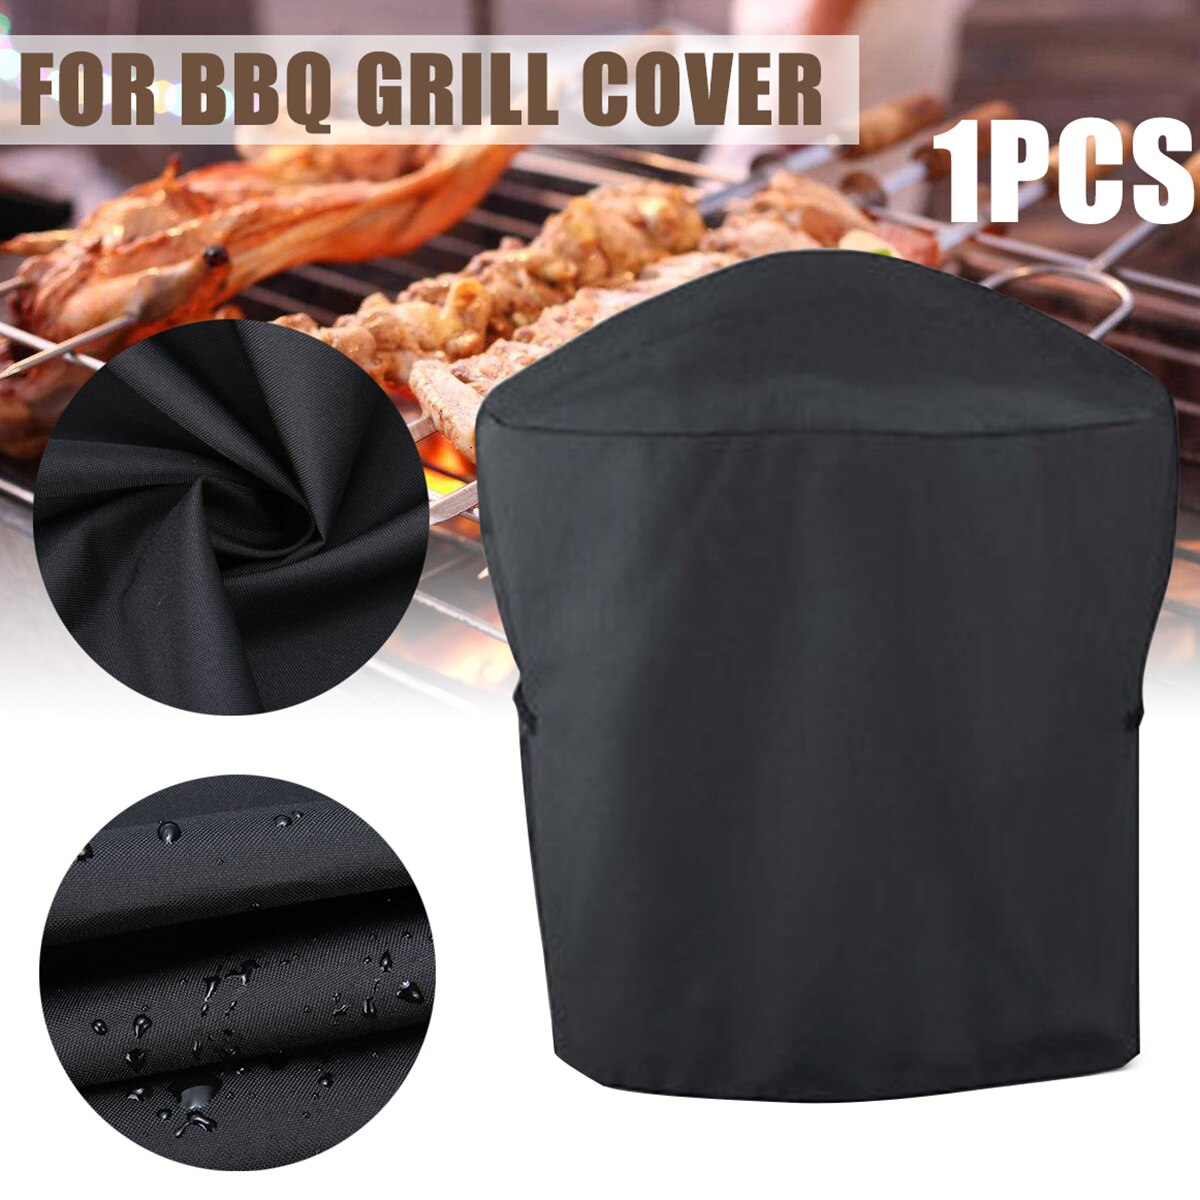 Black BBQ Cover Rolling Cart Waterproof Barbecue Grill Protective Cover for Weber Q200 Series #7113 Camping Accessories